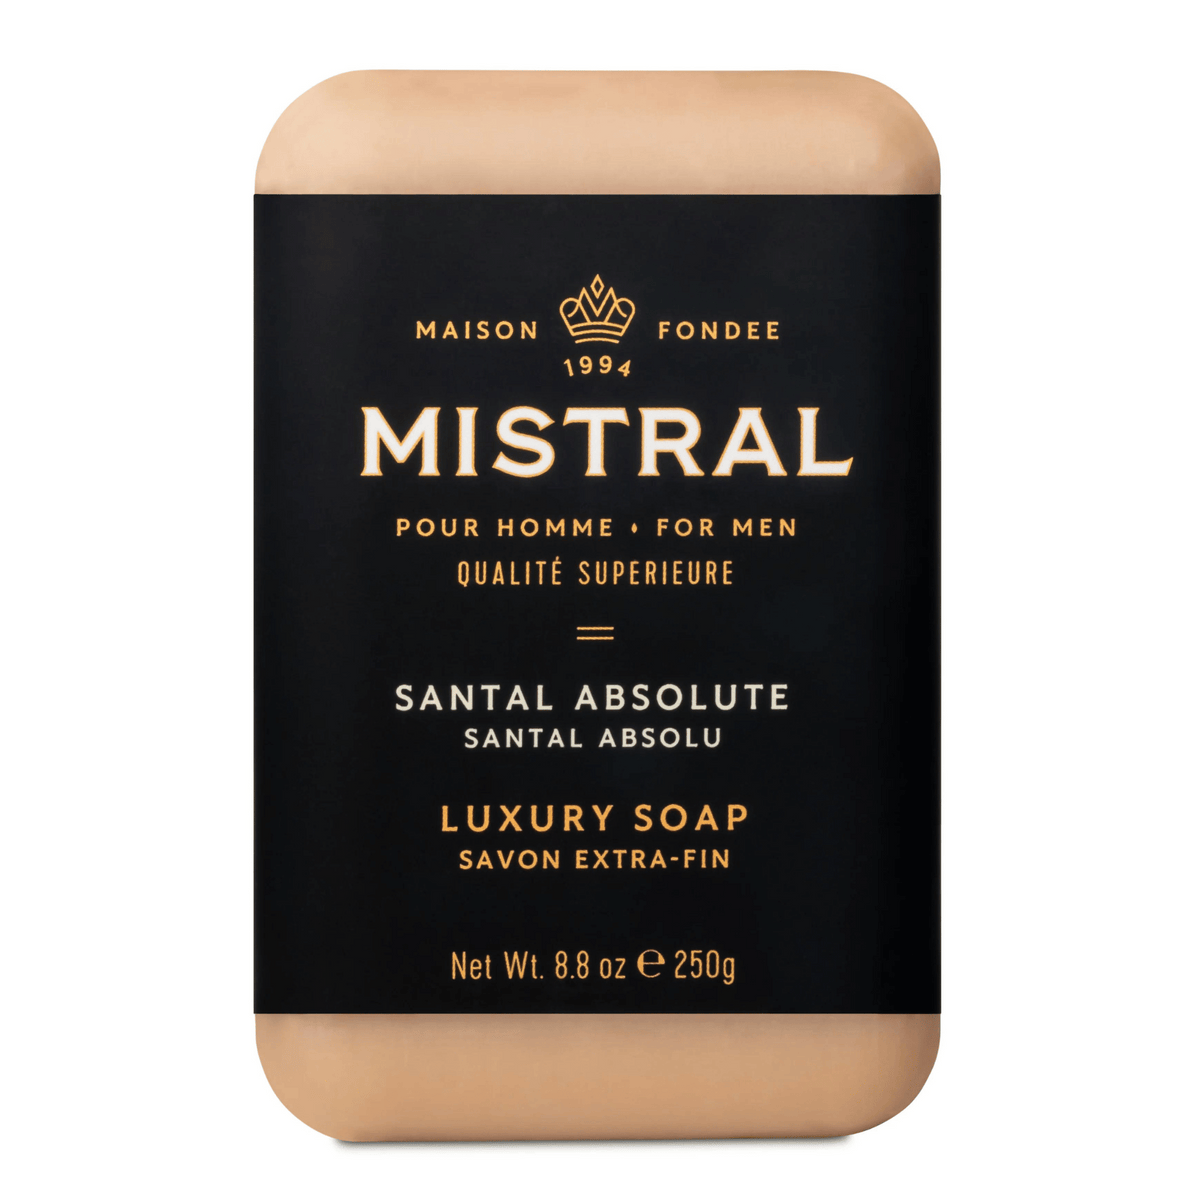 Primary Image of Santal Absolute Bar Soap